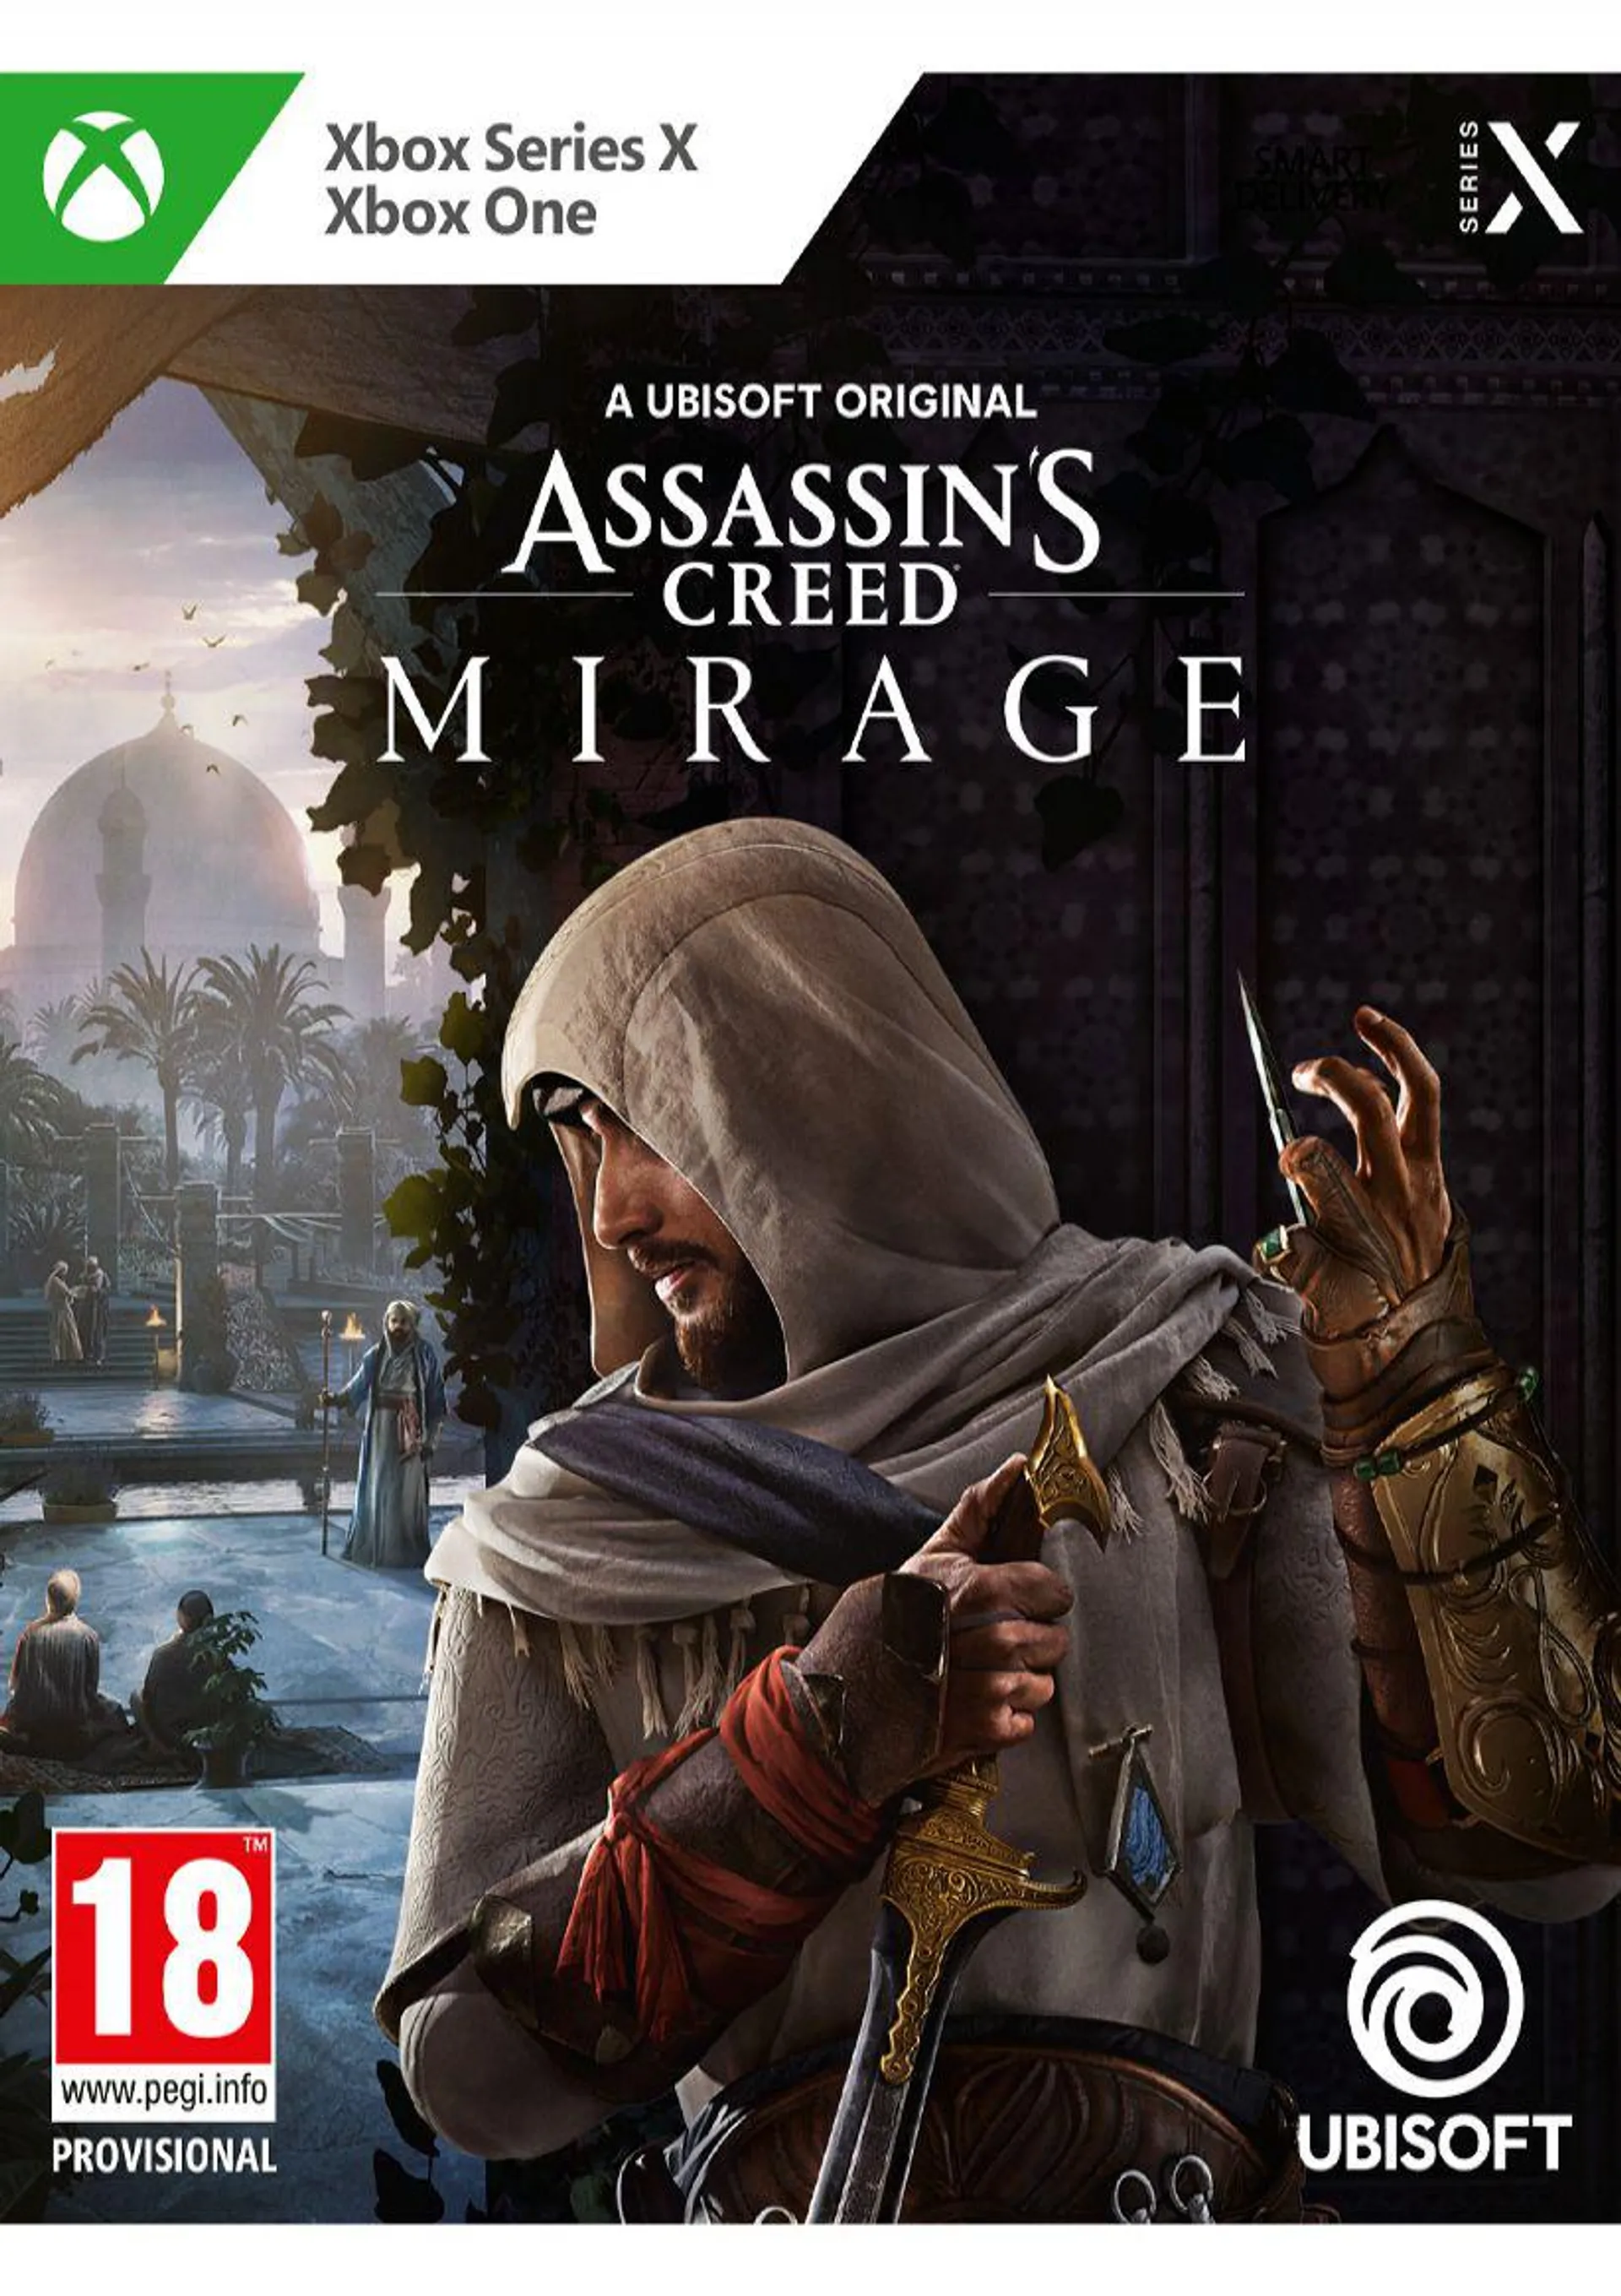 Assassin's Creed Mirage on Xbox Series X | S